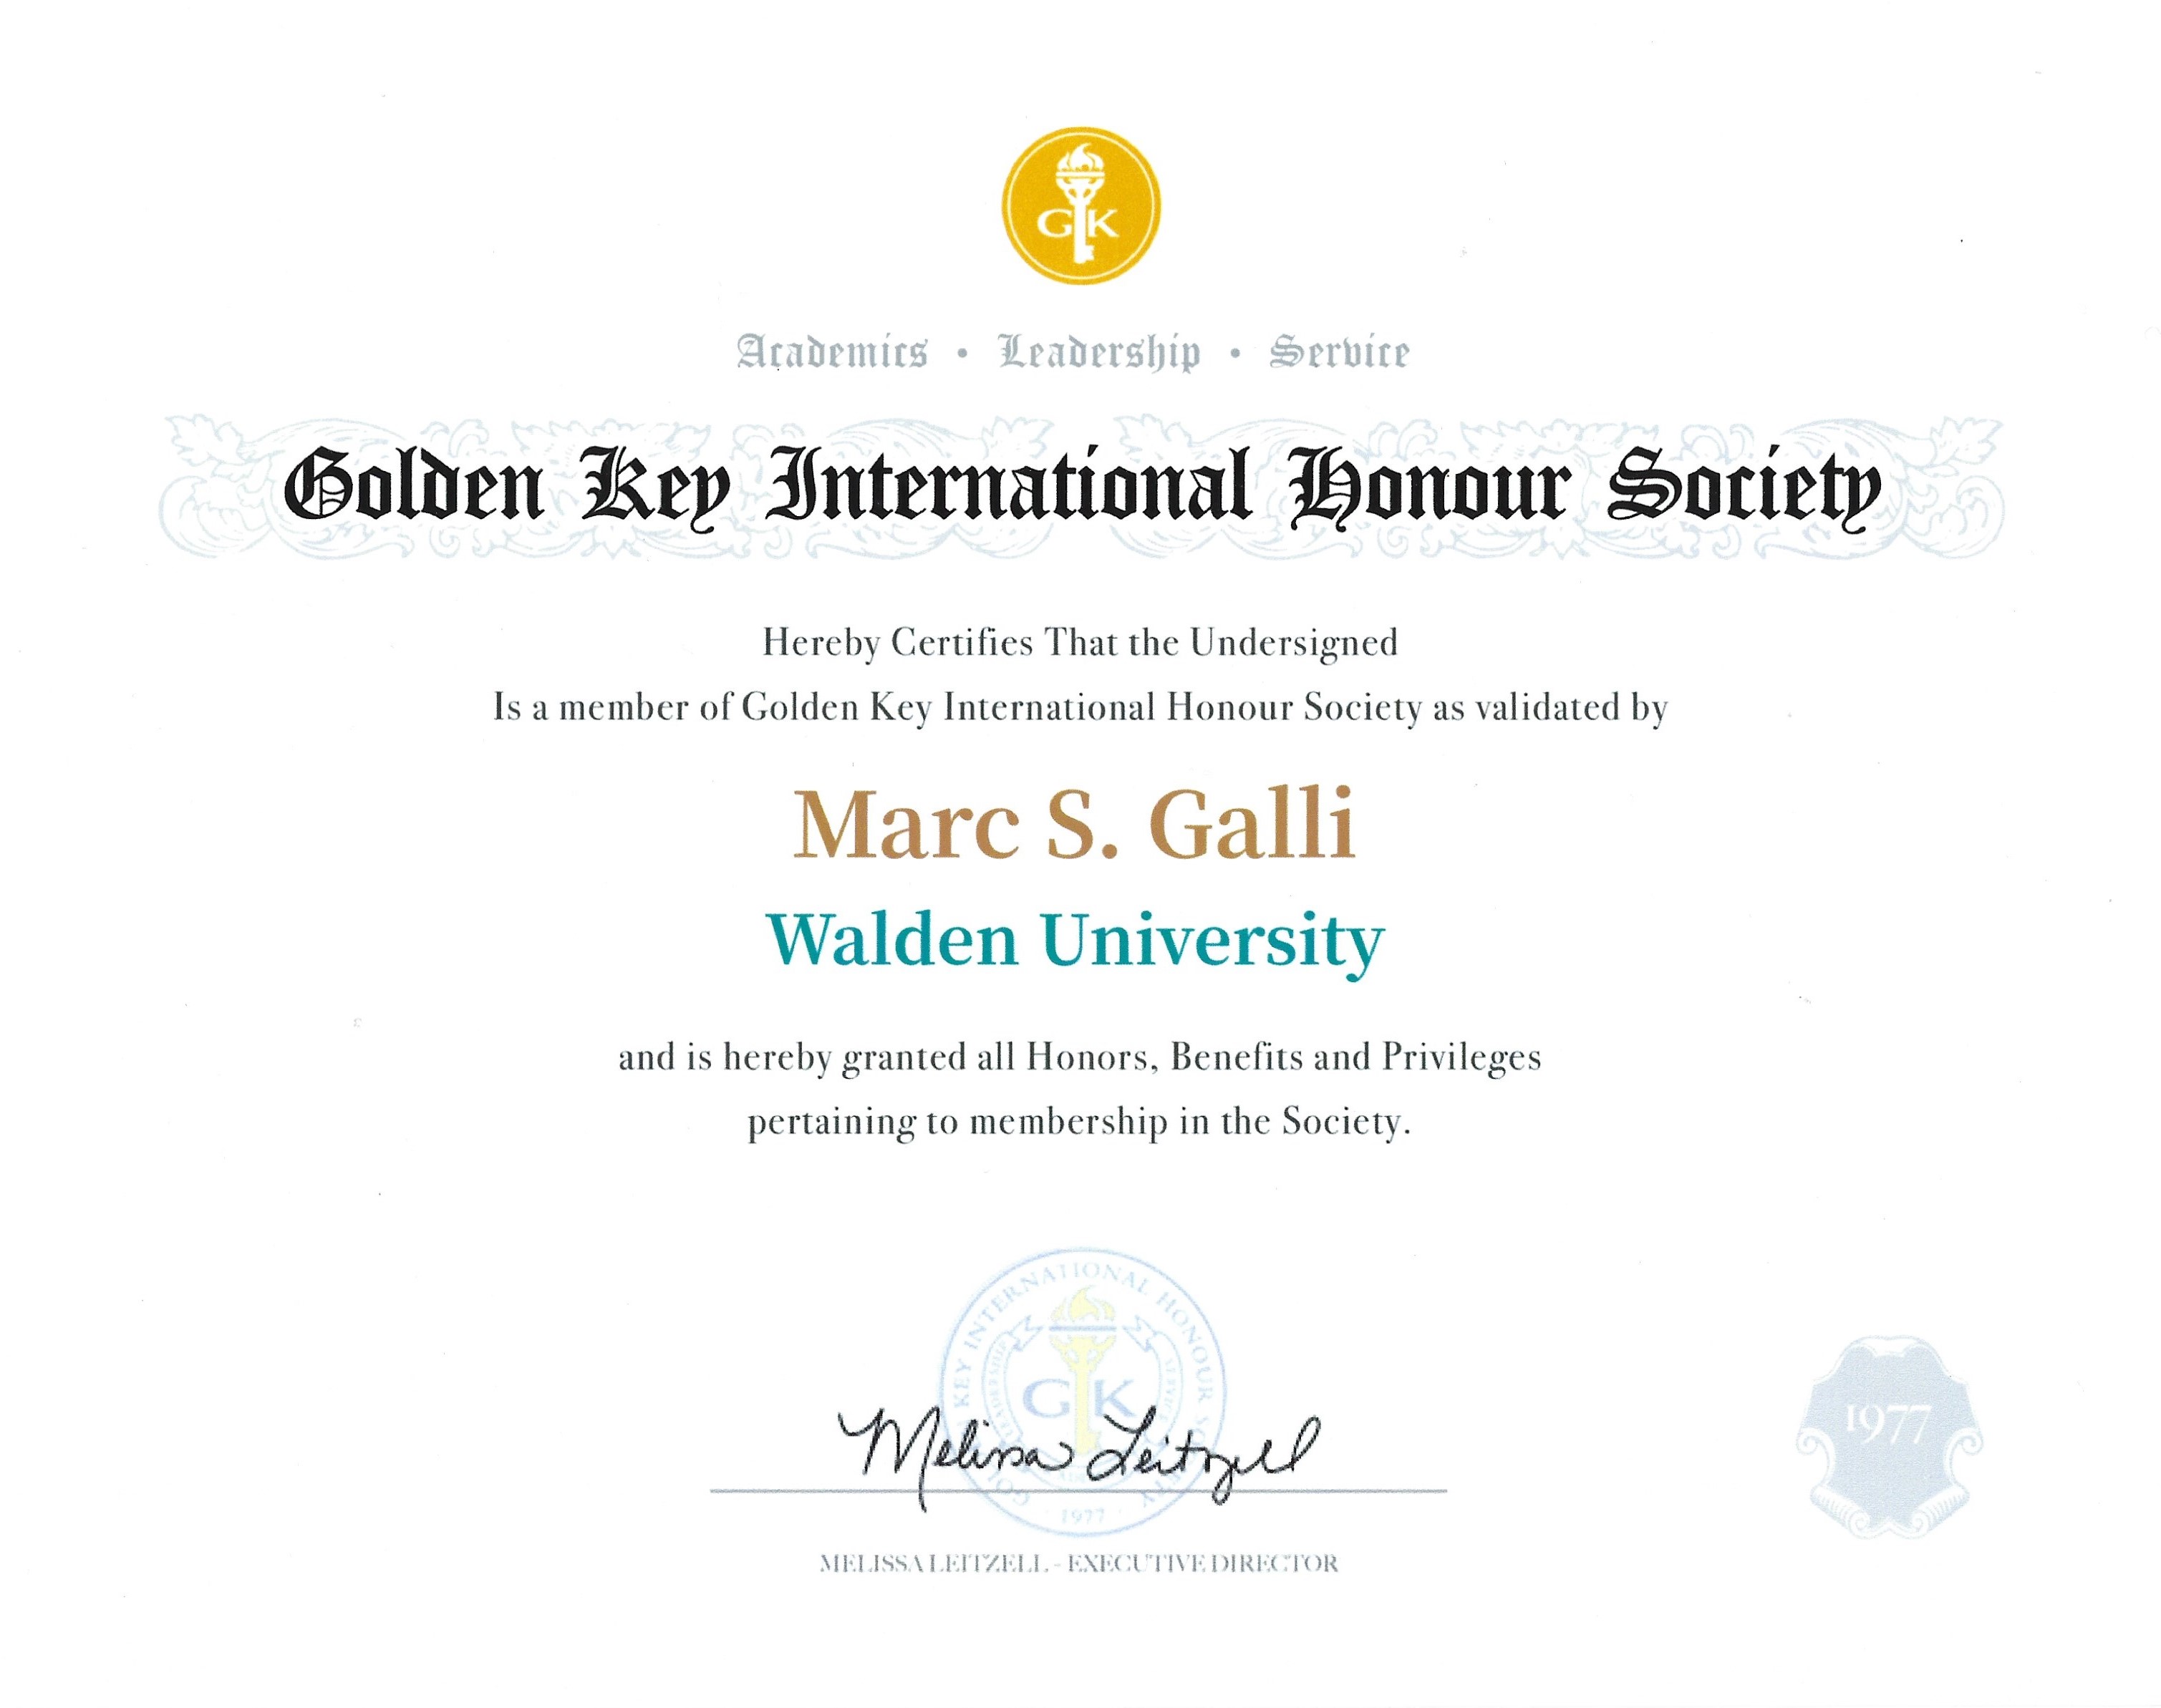 Marc Galli, Certificated by Golden Key International Honor Society